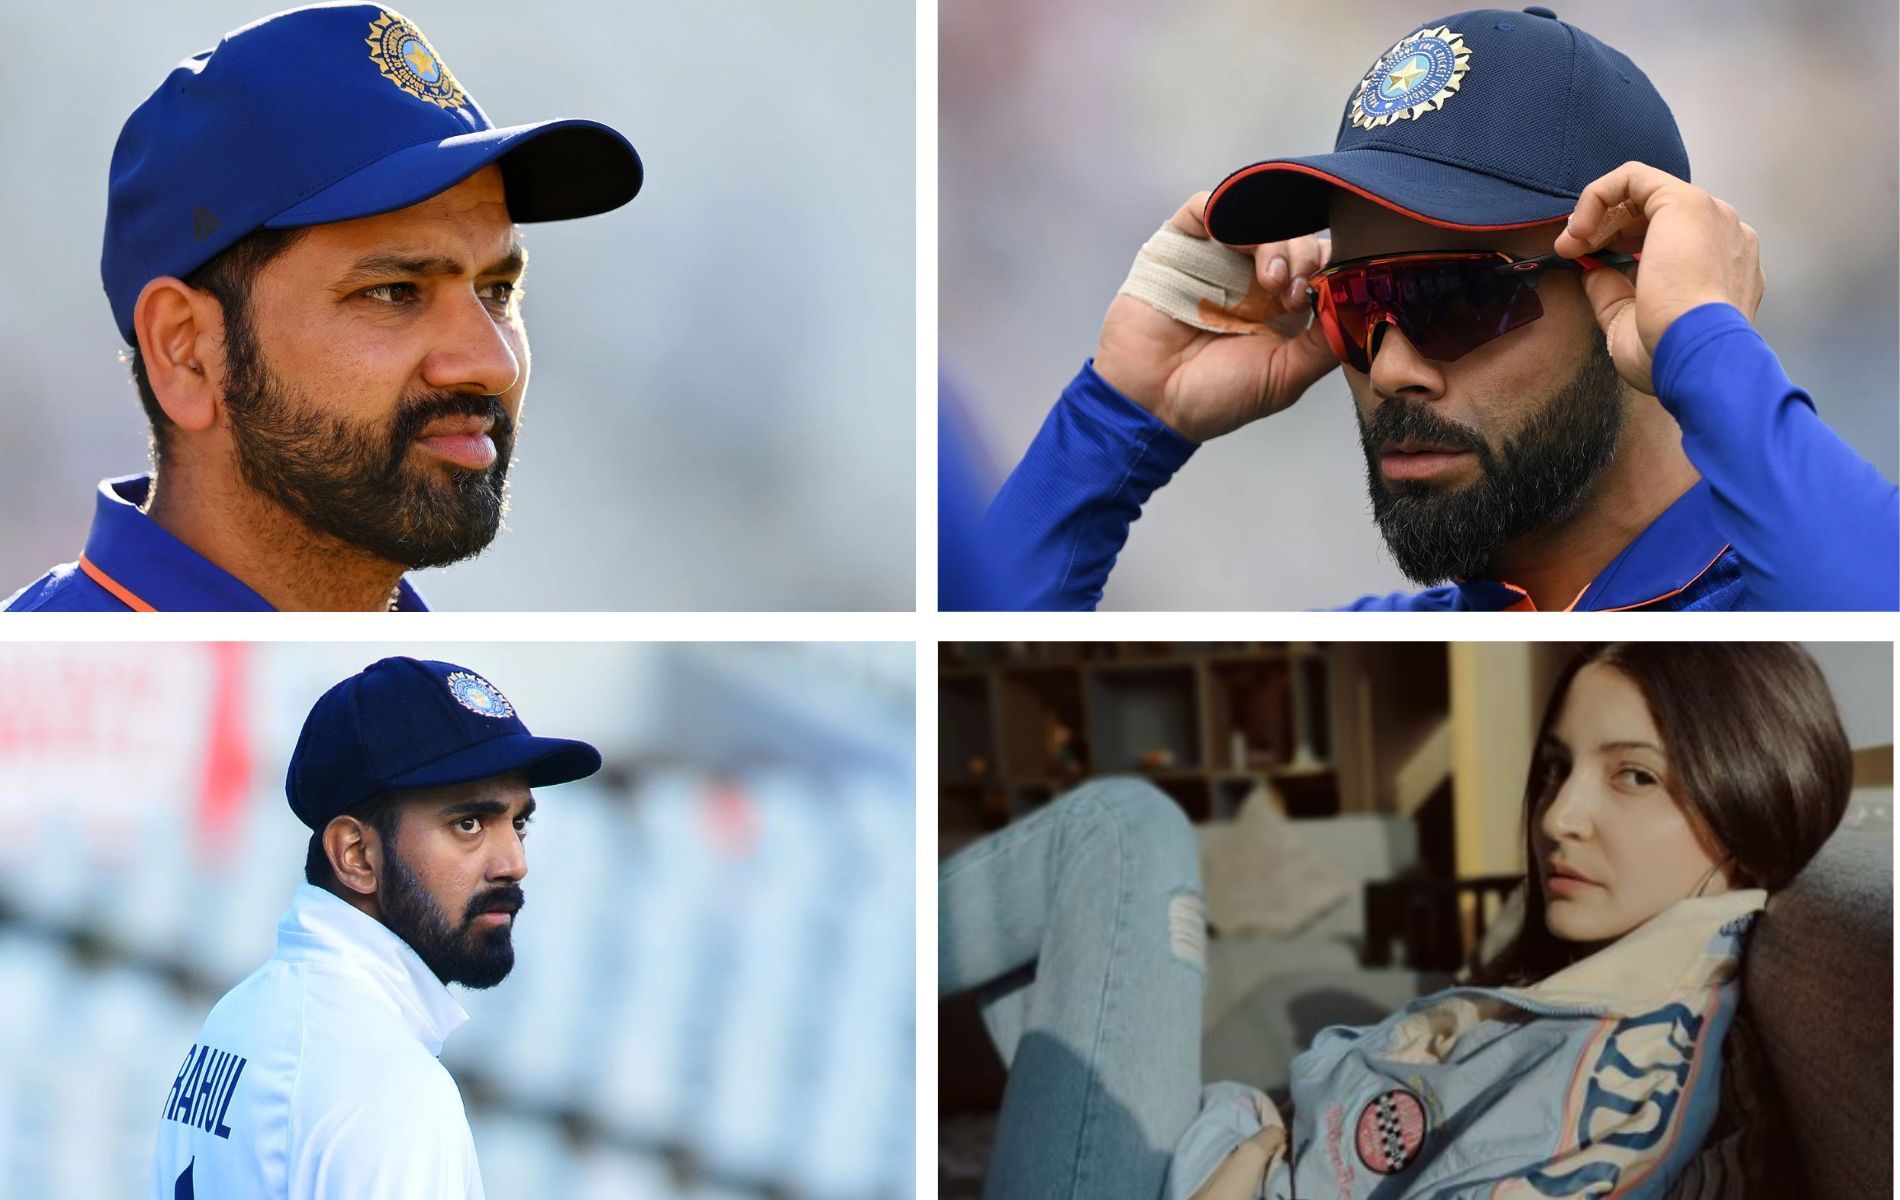 Rohit Sharma has been involved in a few controversies over the years. Pics: Getty Images and Instagram.